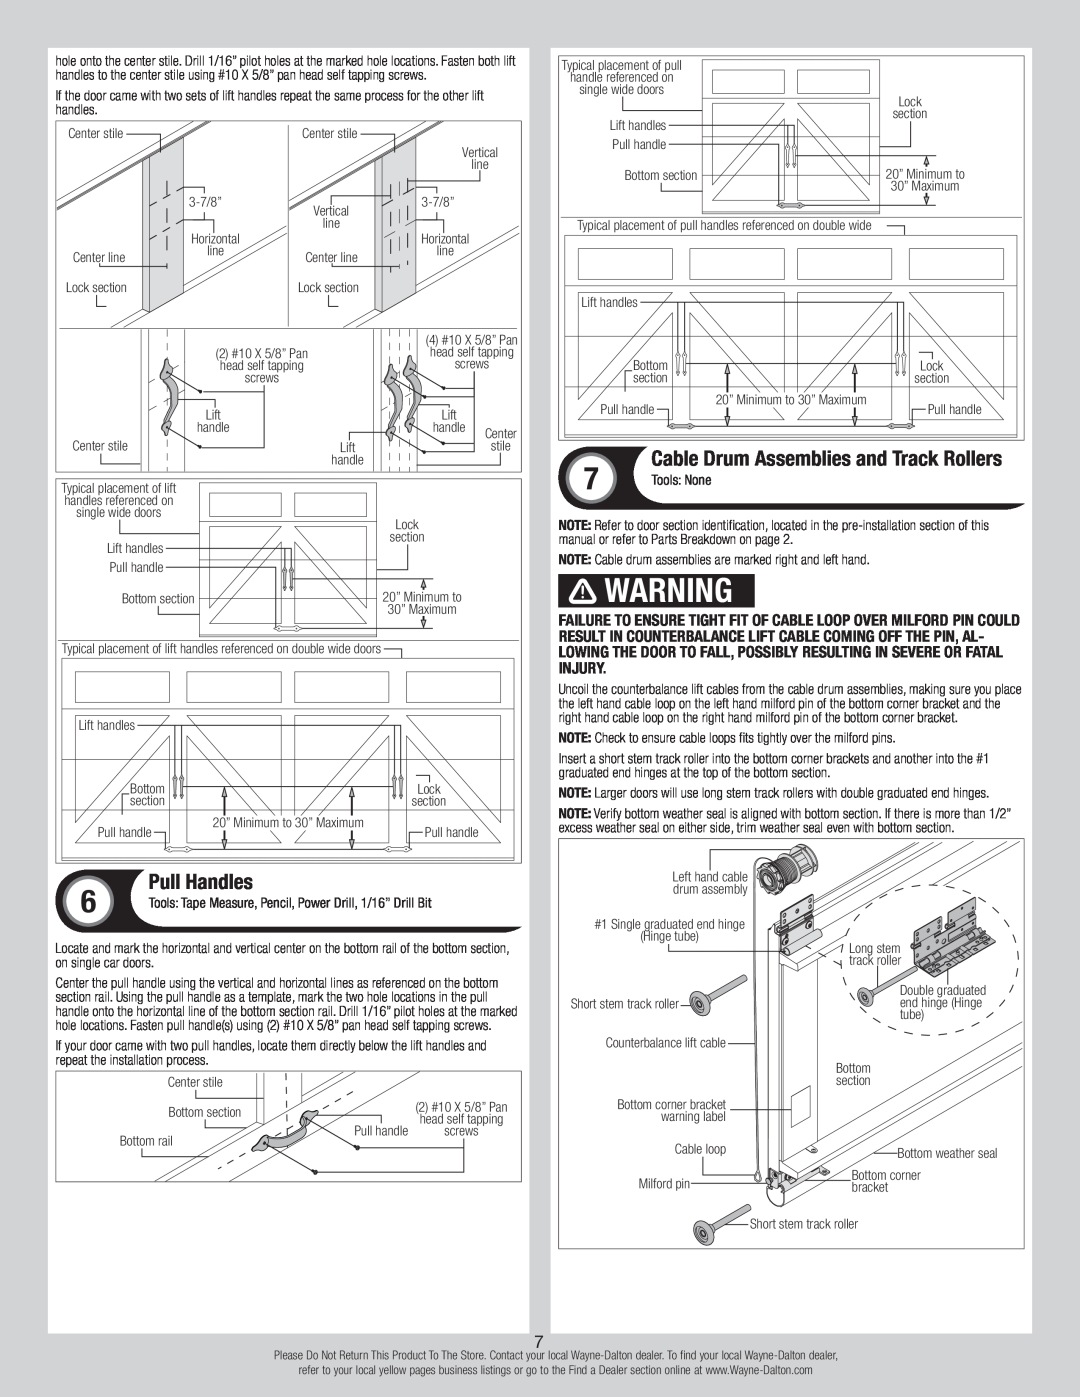 Wayne-Dalton 6100 installation instructions Pull Handles, Cable Drum Assemblies and Track Rollers 